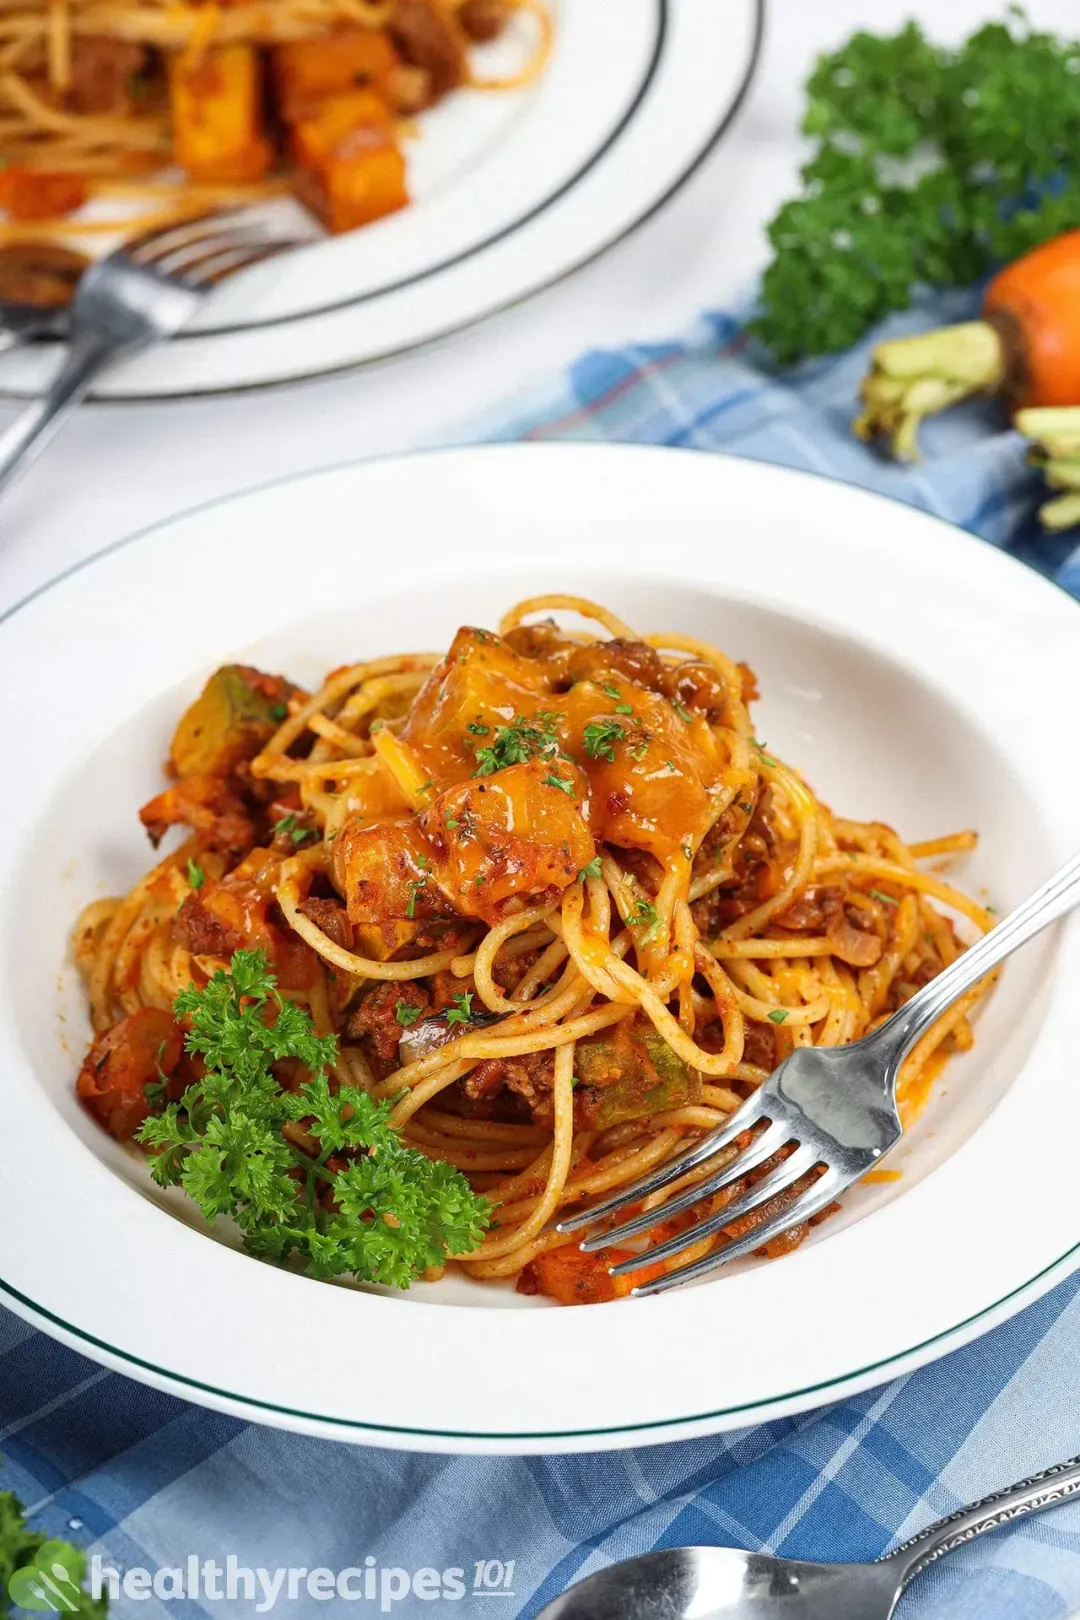 What to Serve With Beefy Butternut Squash Pasta